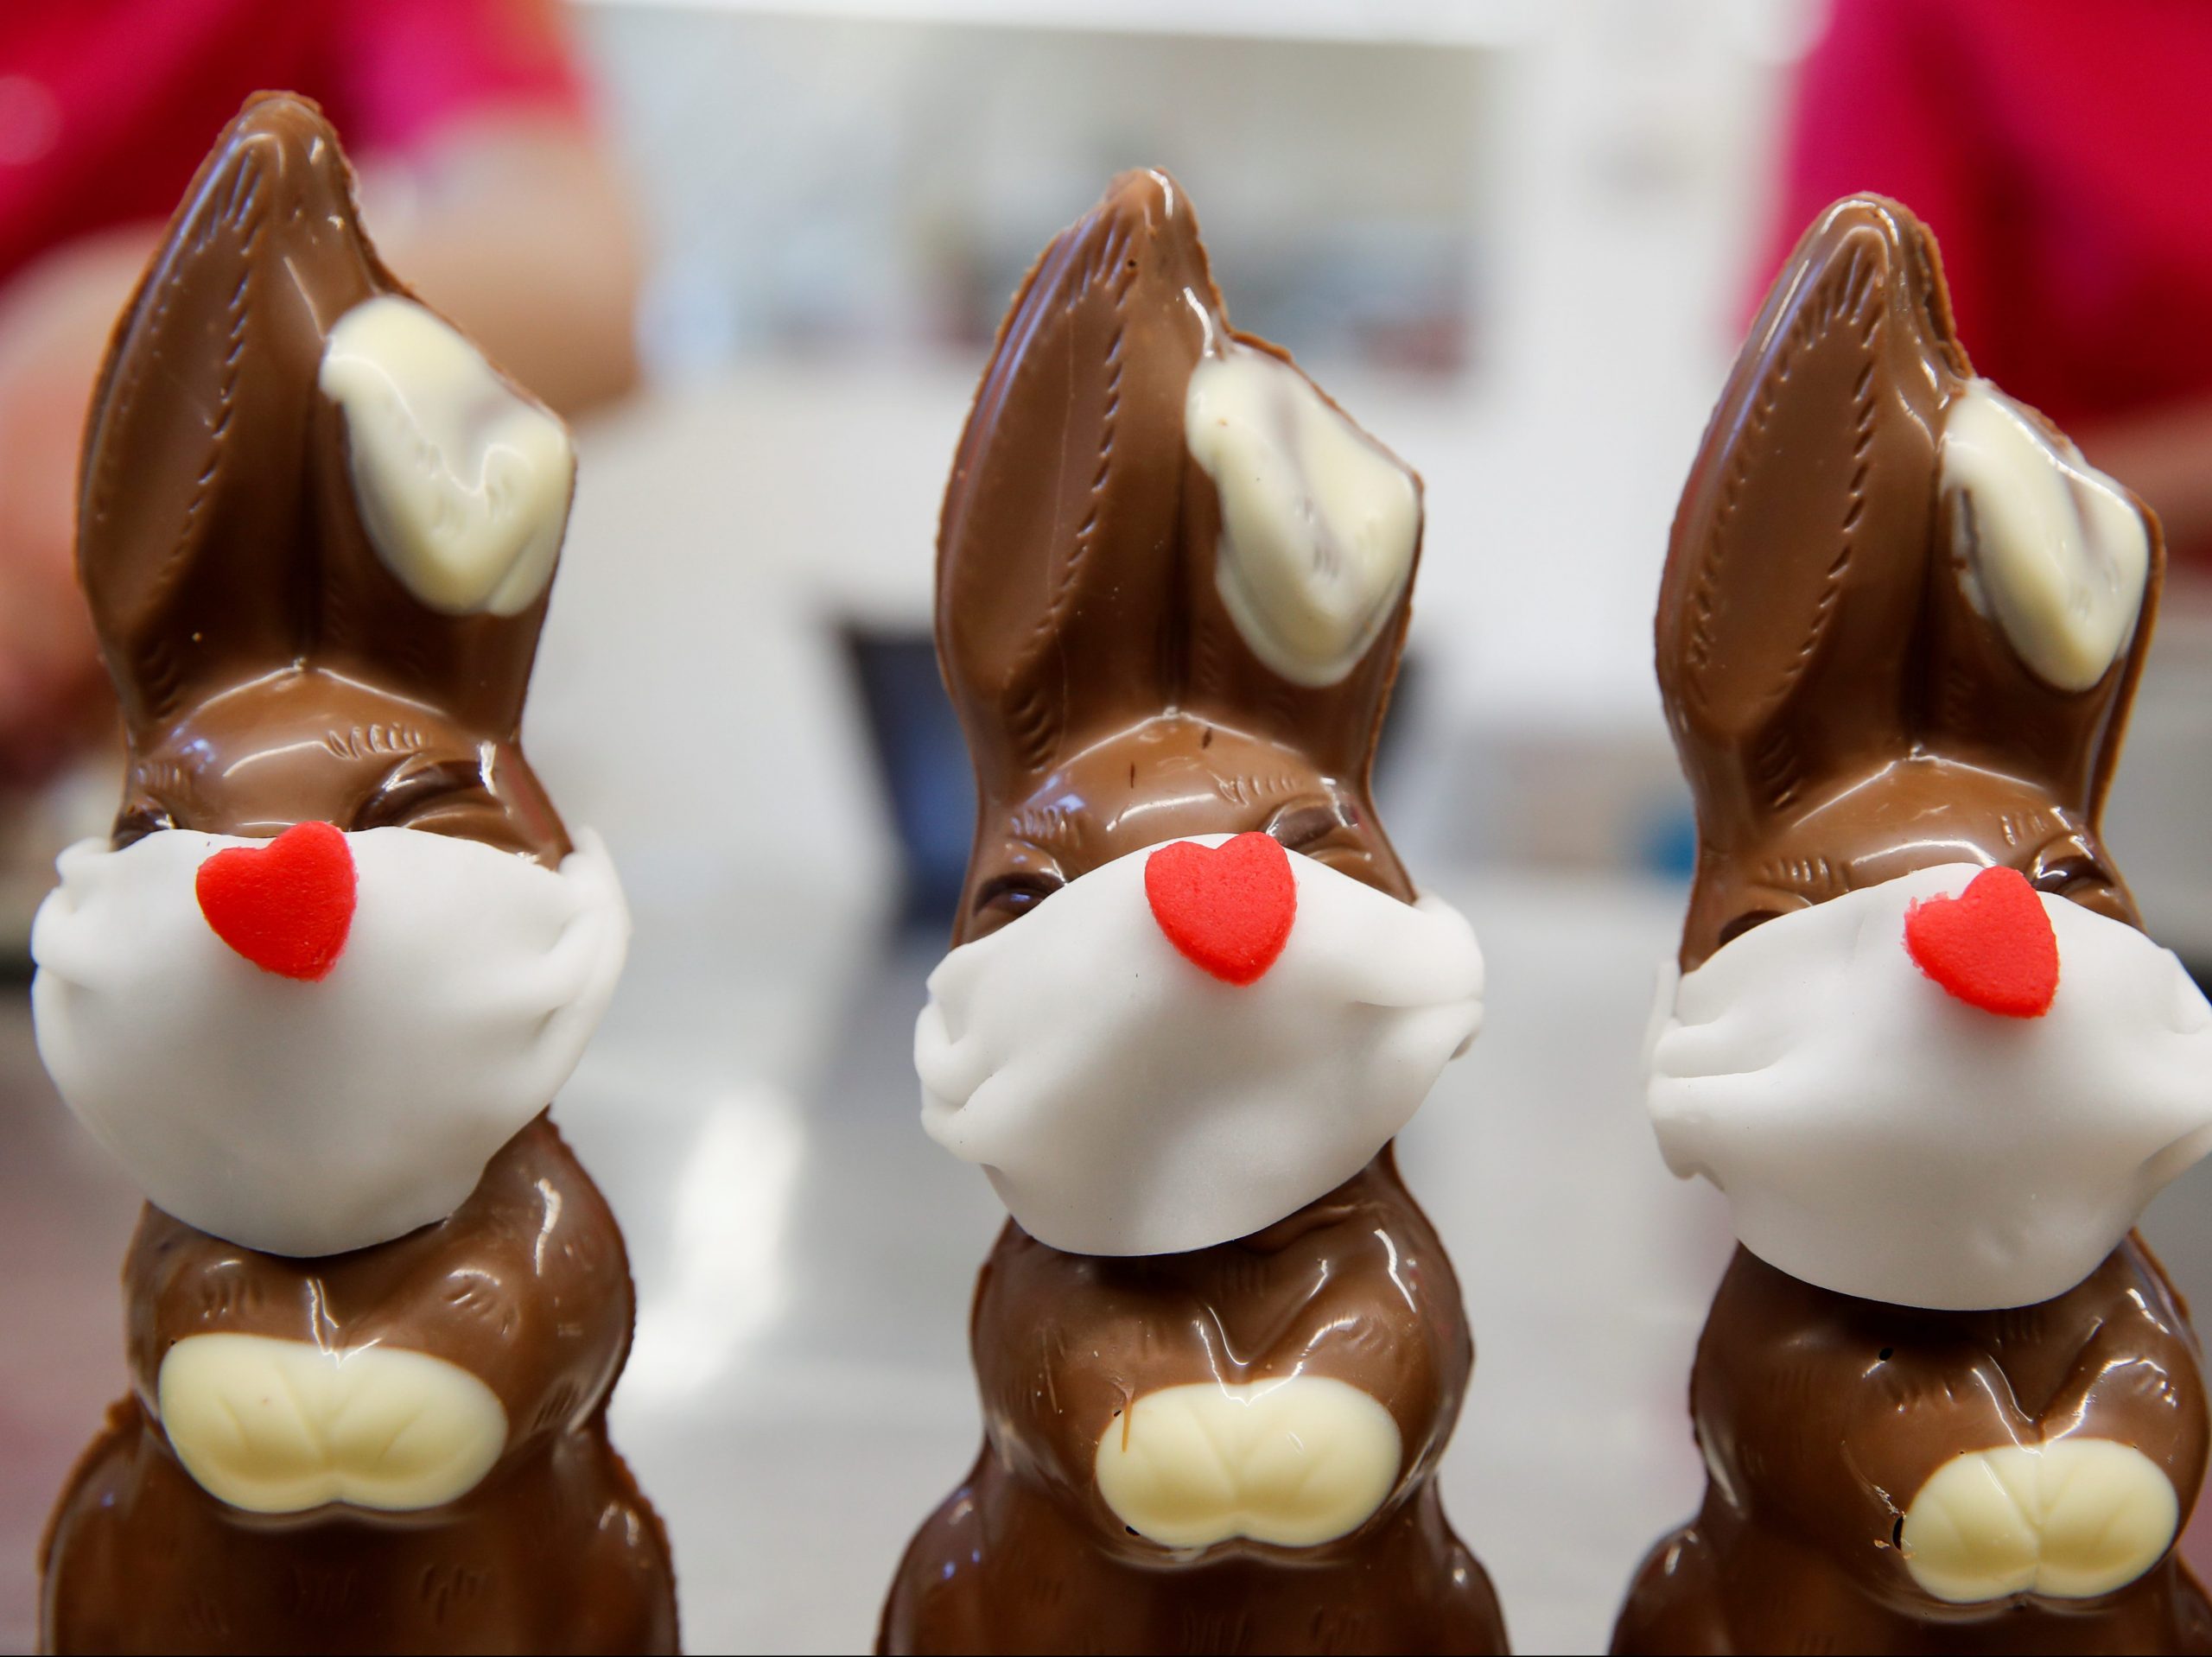 Even Chocolate Easter Bunnies Get Face Masks In Age Of Coronavirus photo